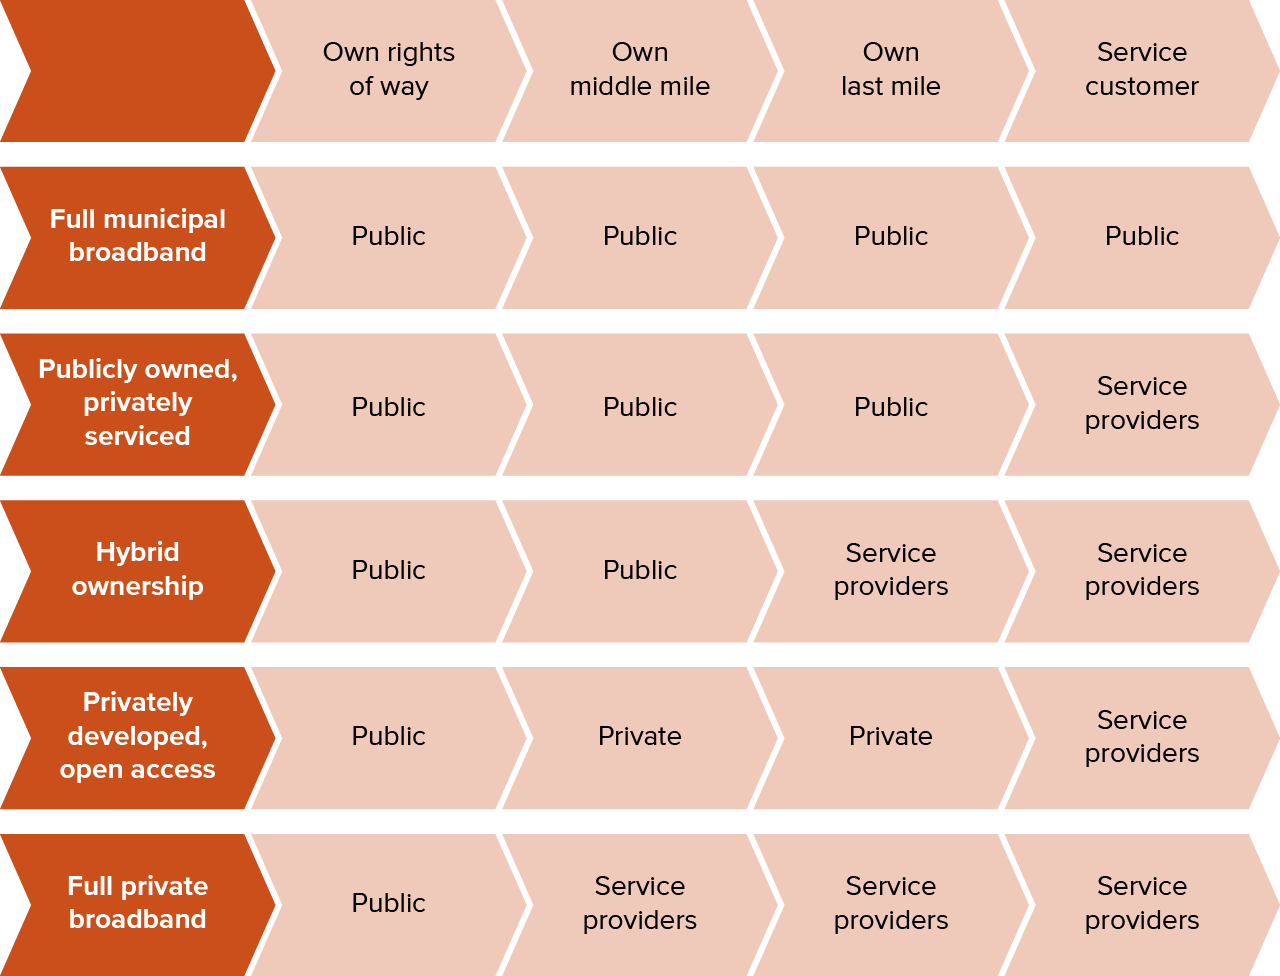 figure 5 - Full municipal broadband entails more public involvement in ownership and operations